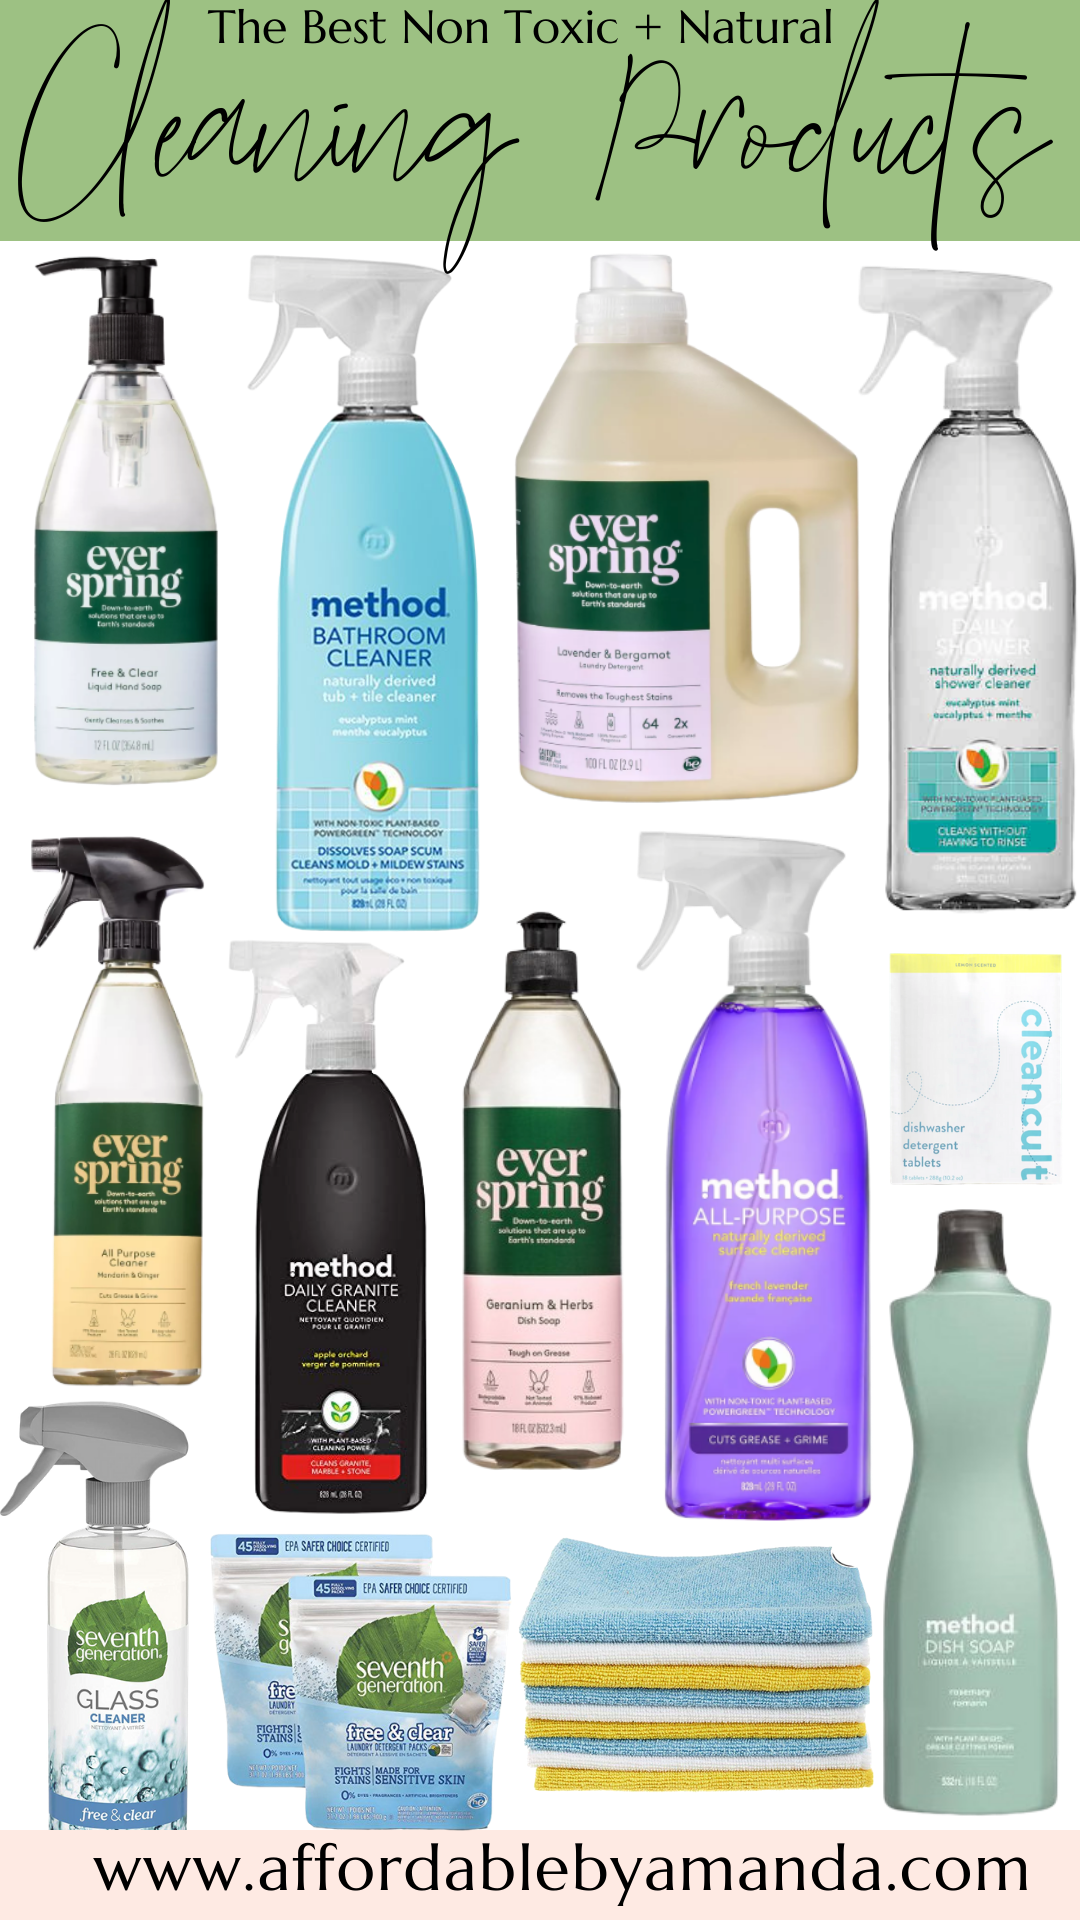 Natural Cleaning Products and Accessories – Better Life